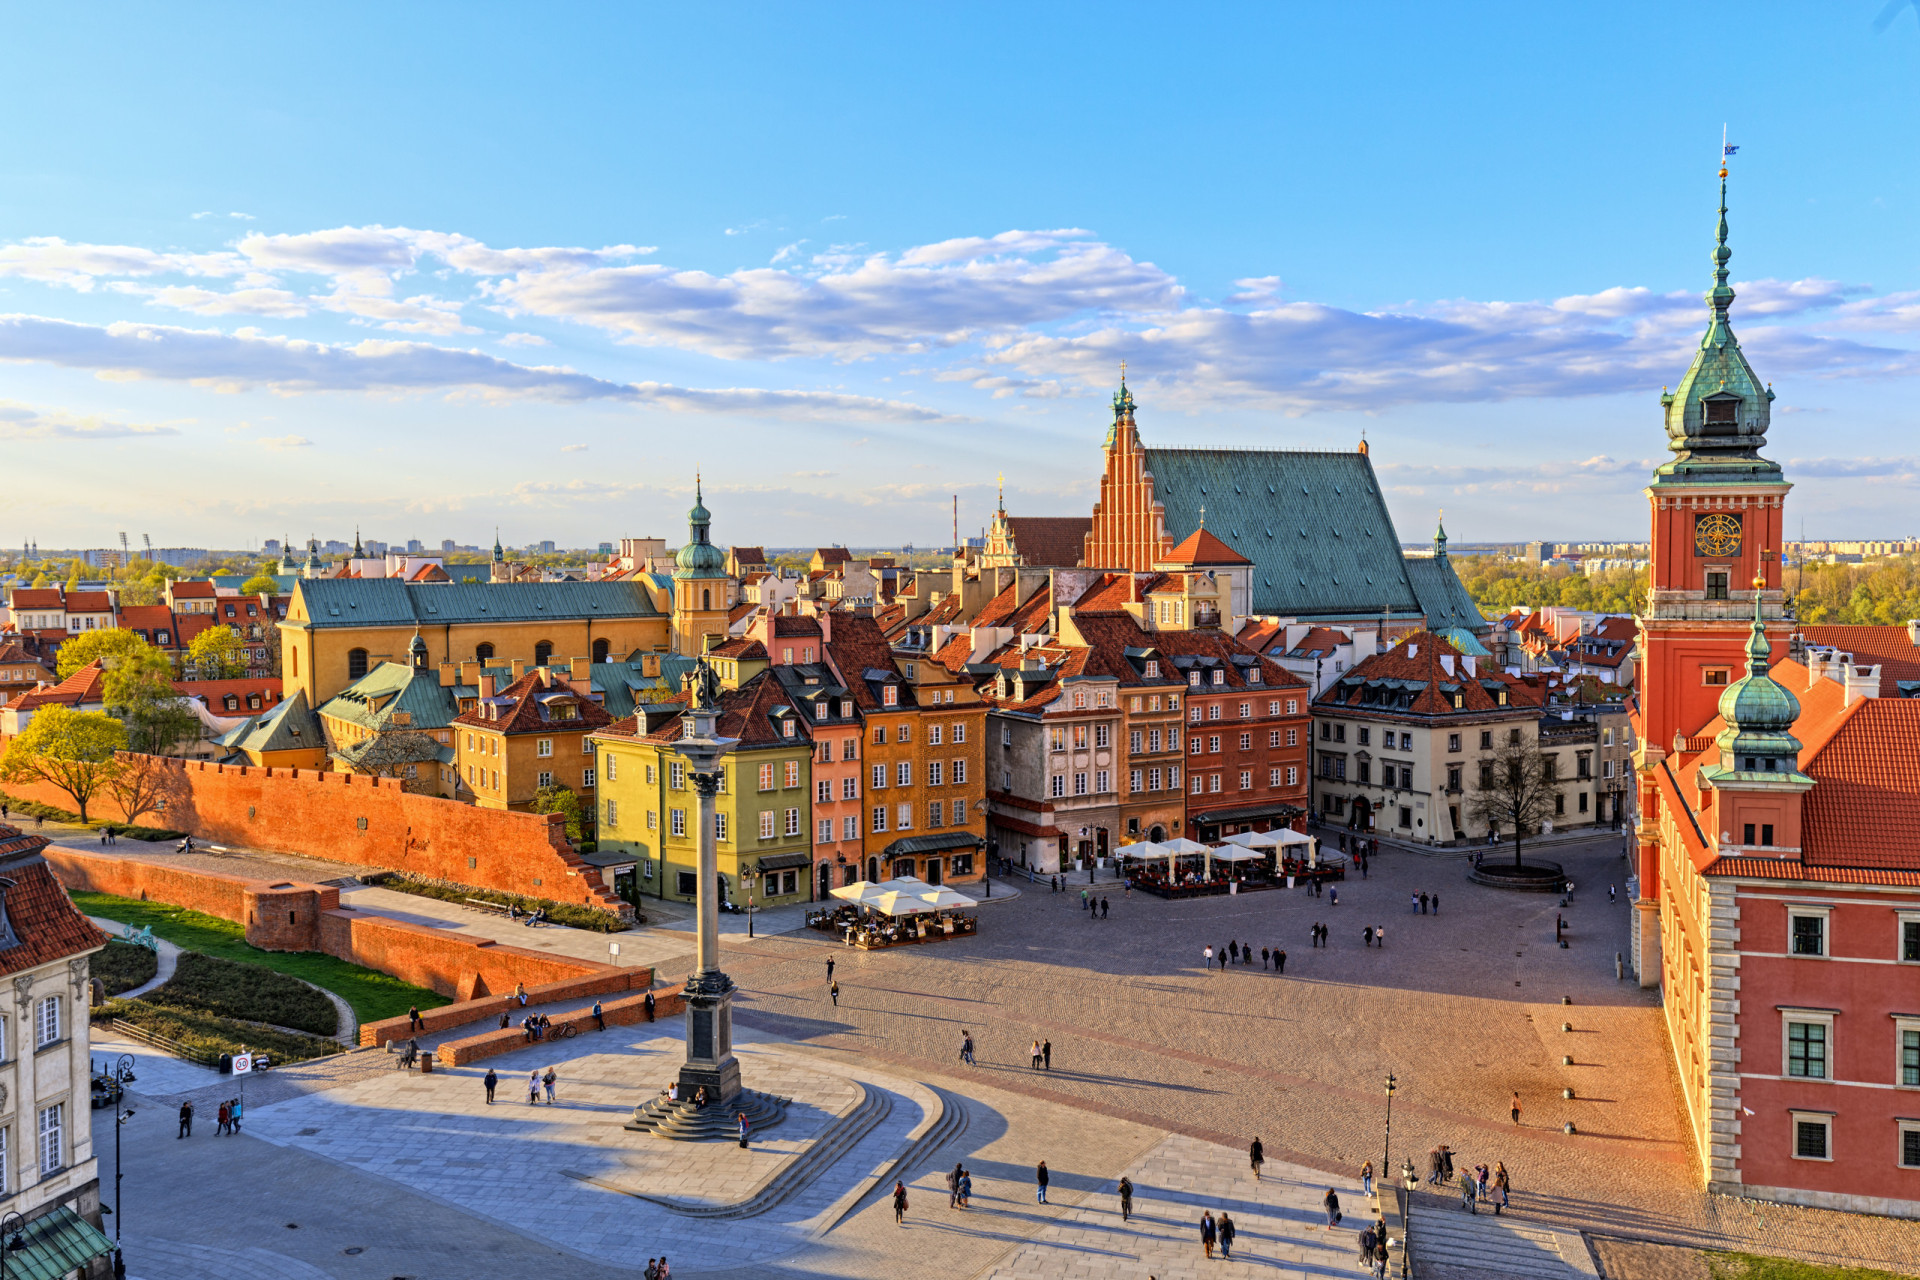 <p>Warsaw melds an attractive historical hub with a contemporary cityscape marked by steel and glass skyscrapers and Stalinist towers. The big news in 2024 is that the Museum of Modern Art in Warsaw will open in new premises as a feature of the city's funky arts district.</p><p>You may also like:<a href="https://www.starsinsider.com/n/472742?utm_source=msn.com&utm_medium=display&utm_campaign=referral_description&utm_content=636762en-en_selected"> International secret societies you didn't know existed</a></p>